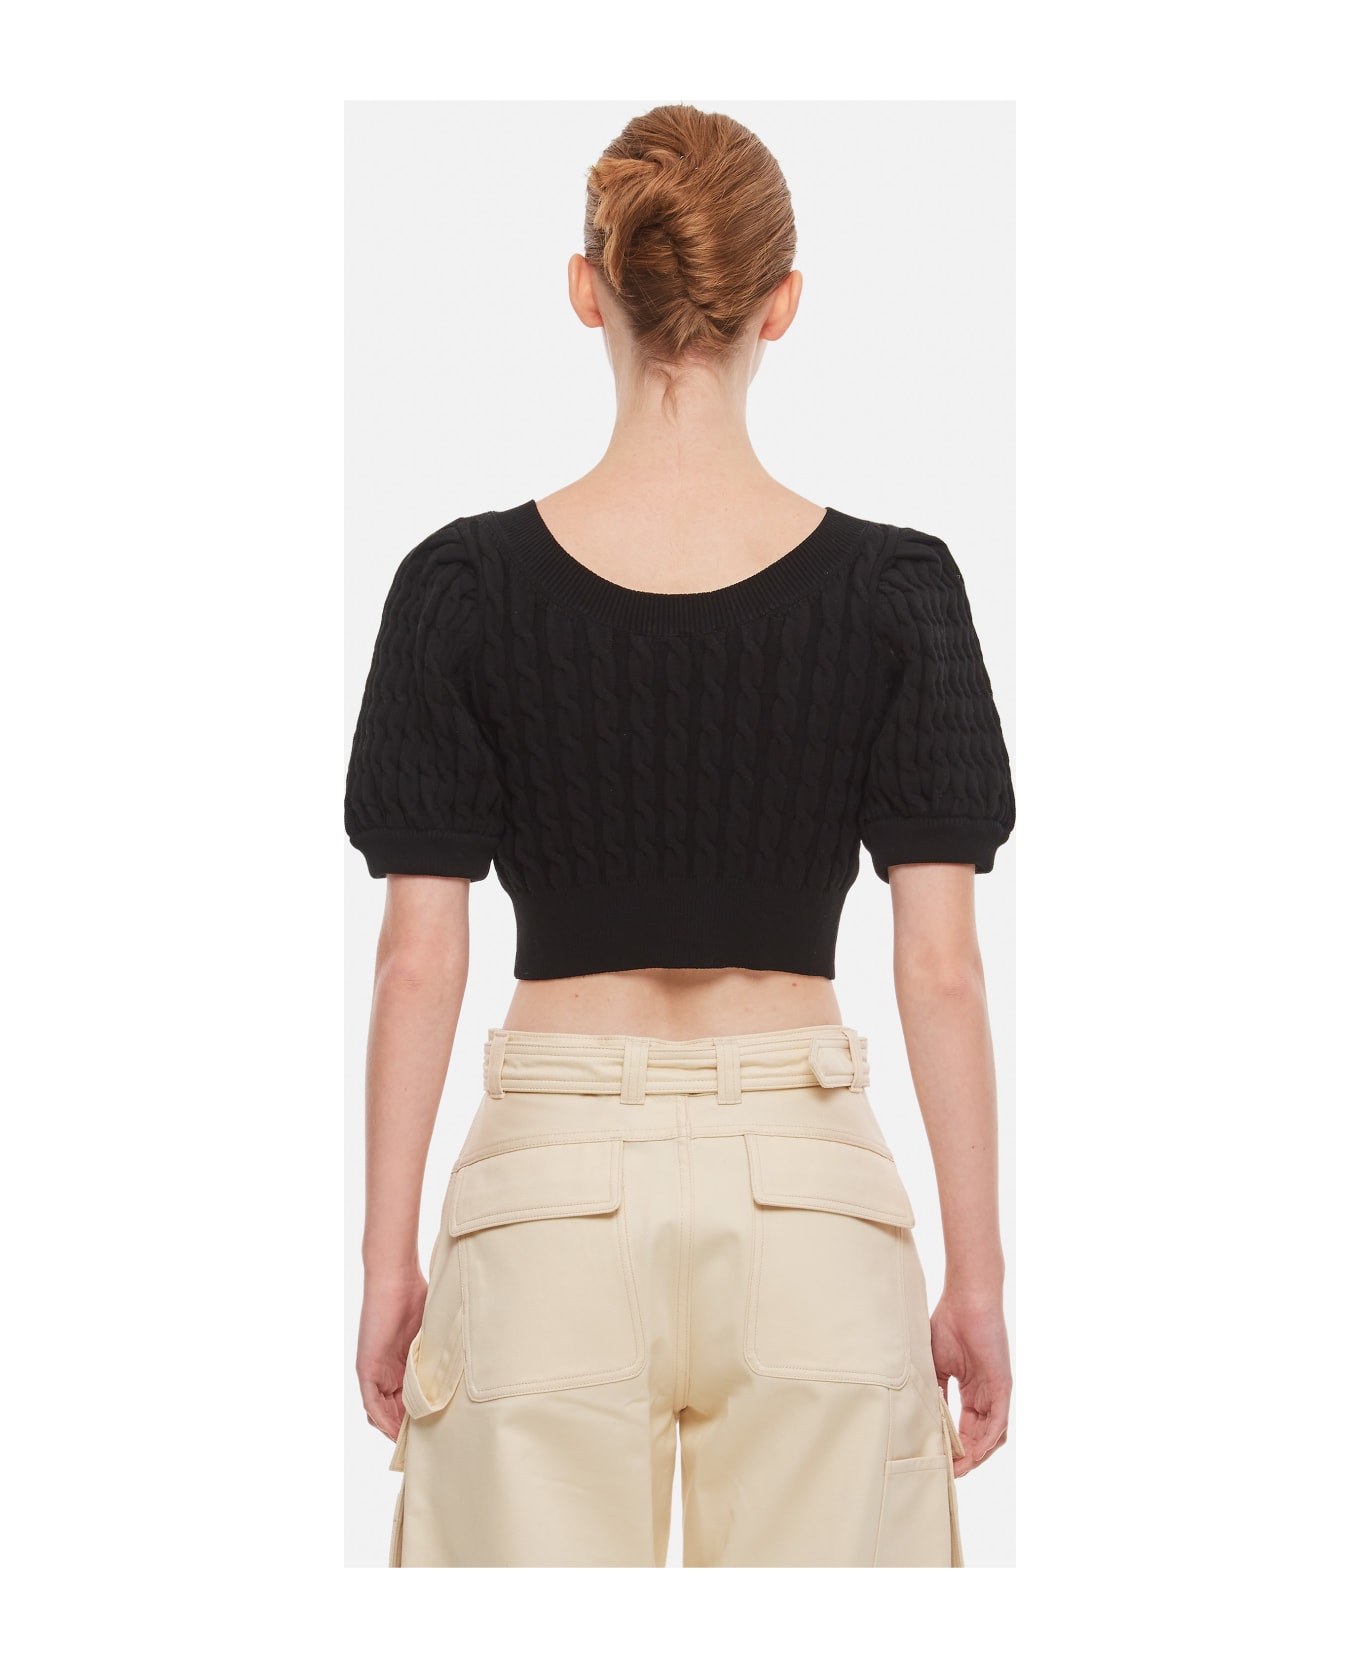 Simone Rocha Cropped Puff Sleeve Open Neck Cable Top - Black ニットウェア